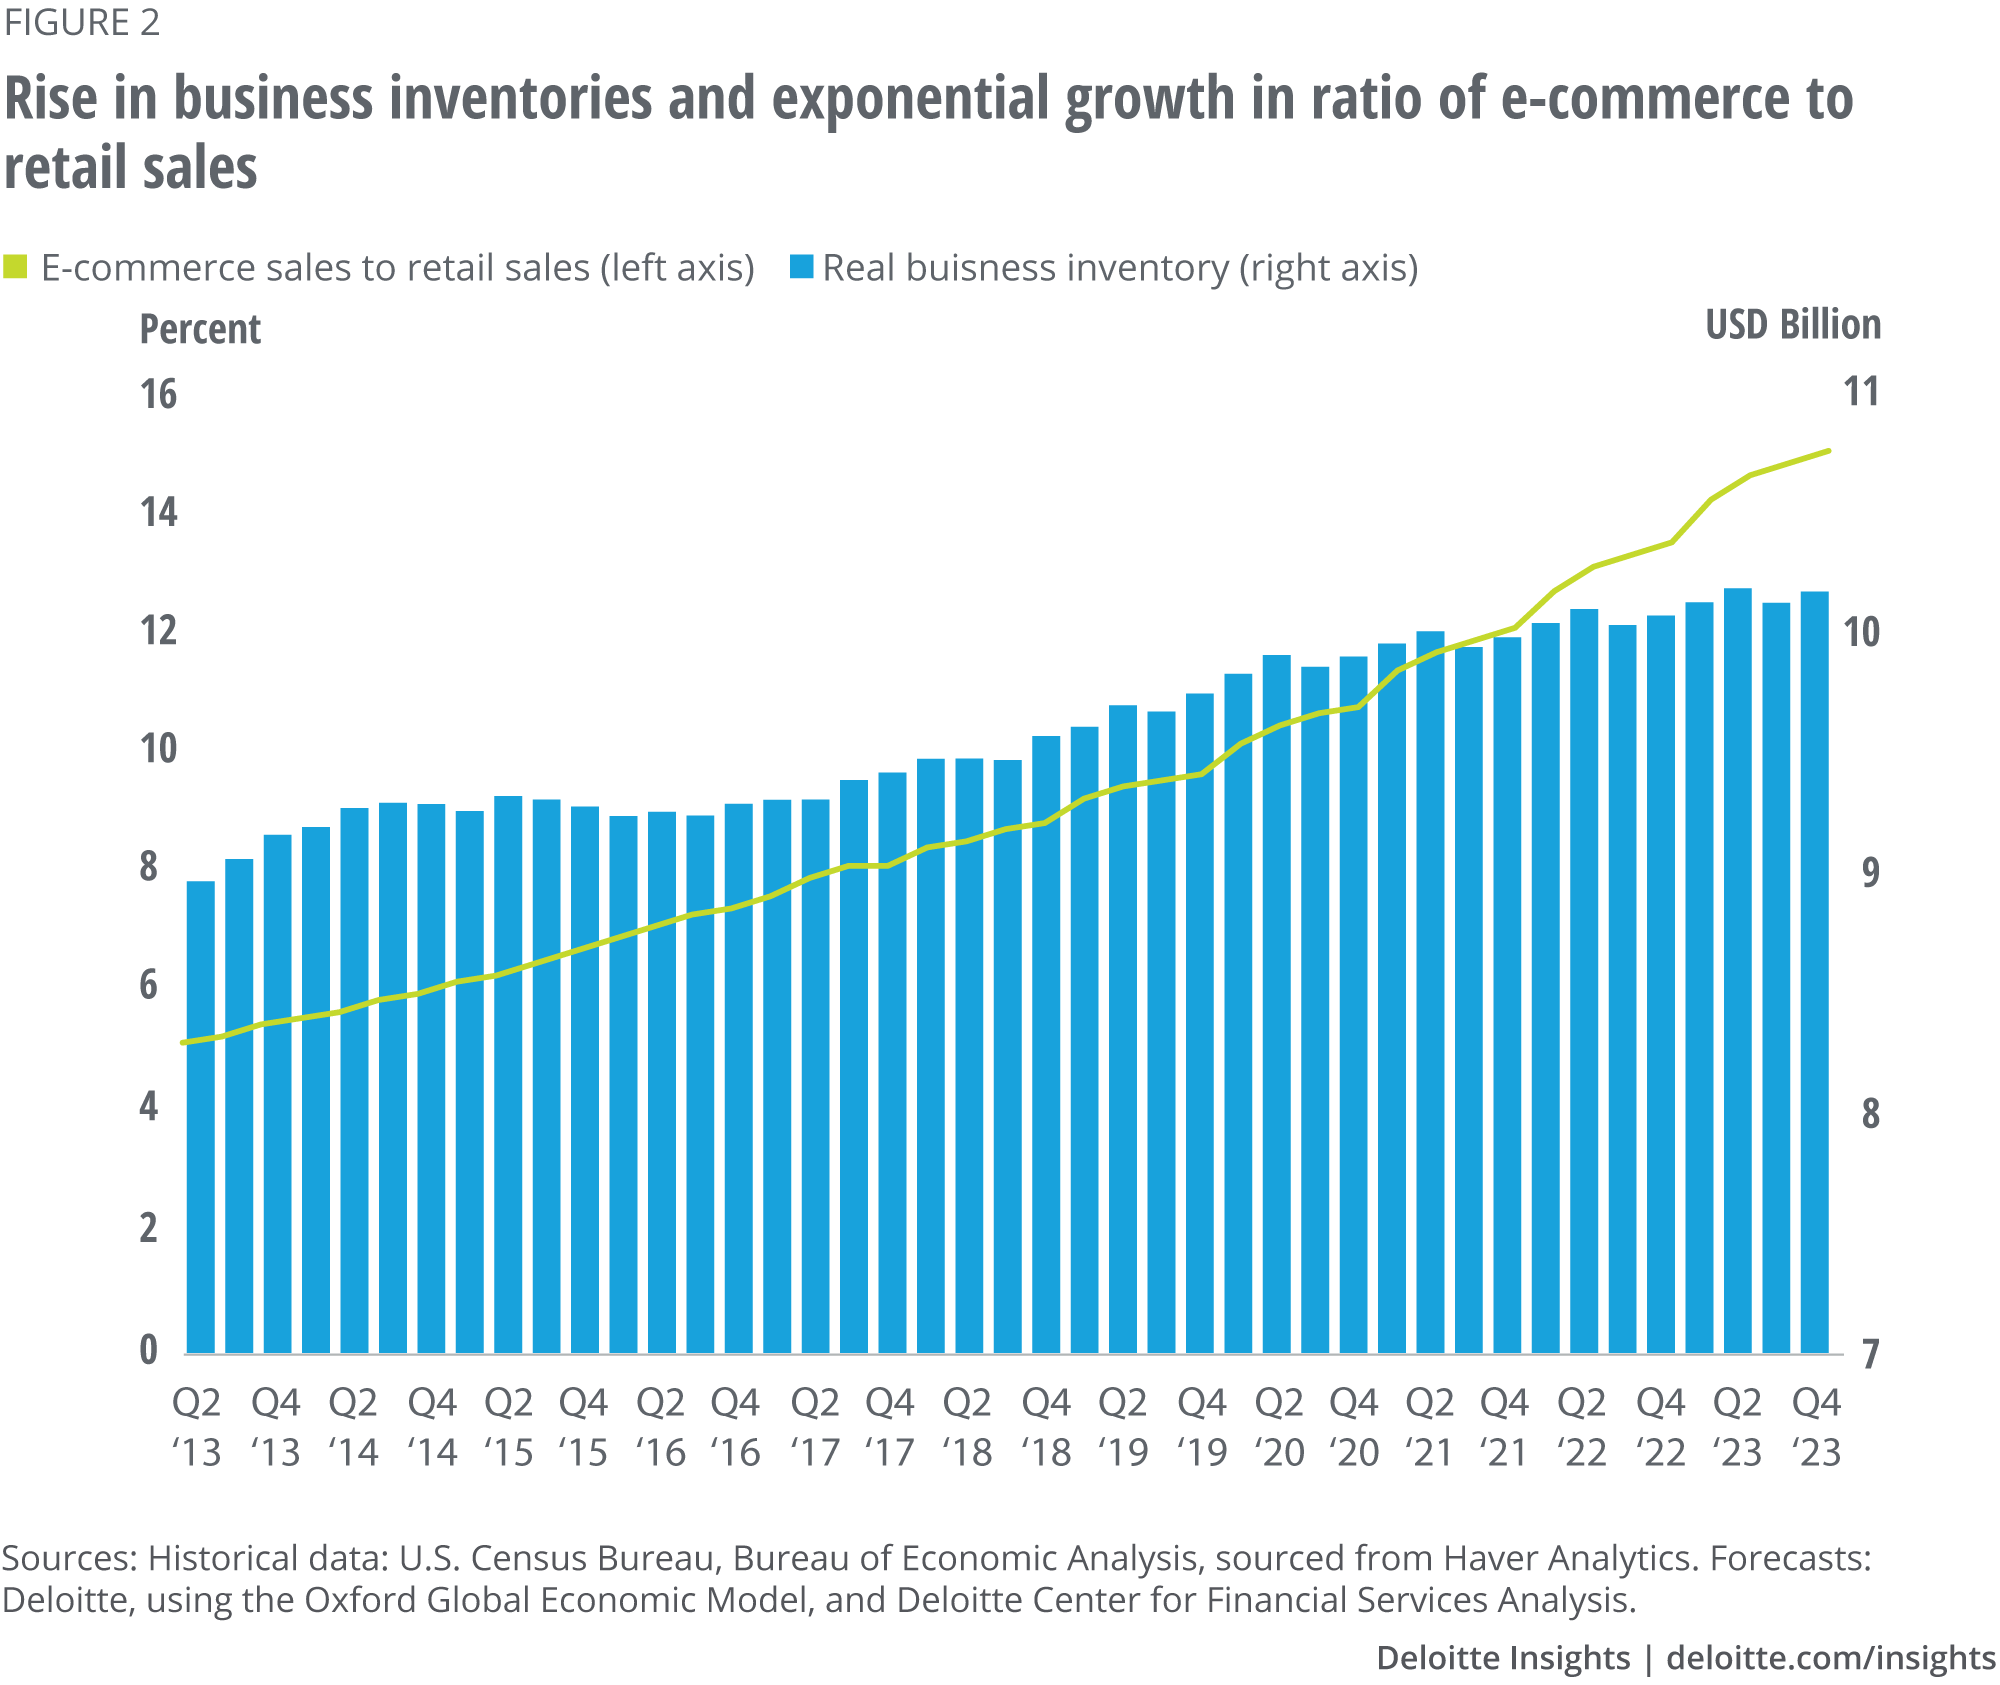 Rise in business inventories and exponential growth in ratio of e-commerce to retail sales